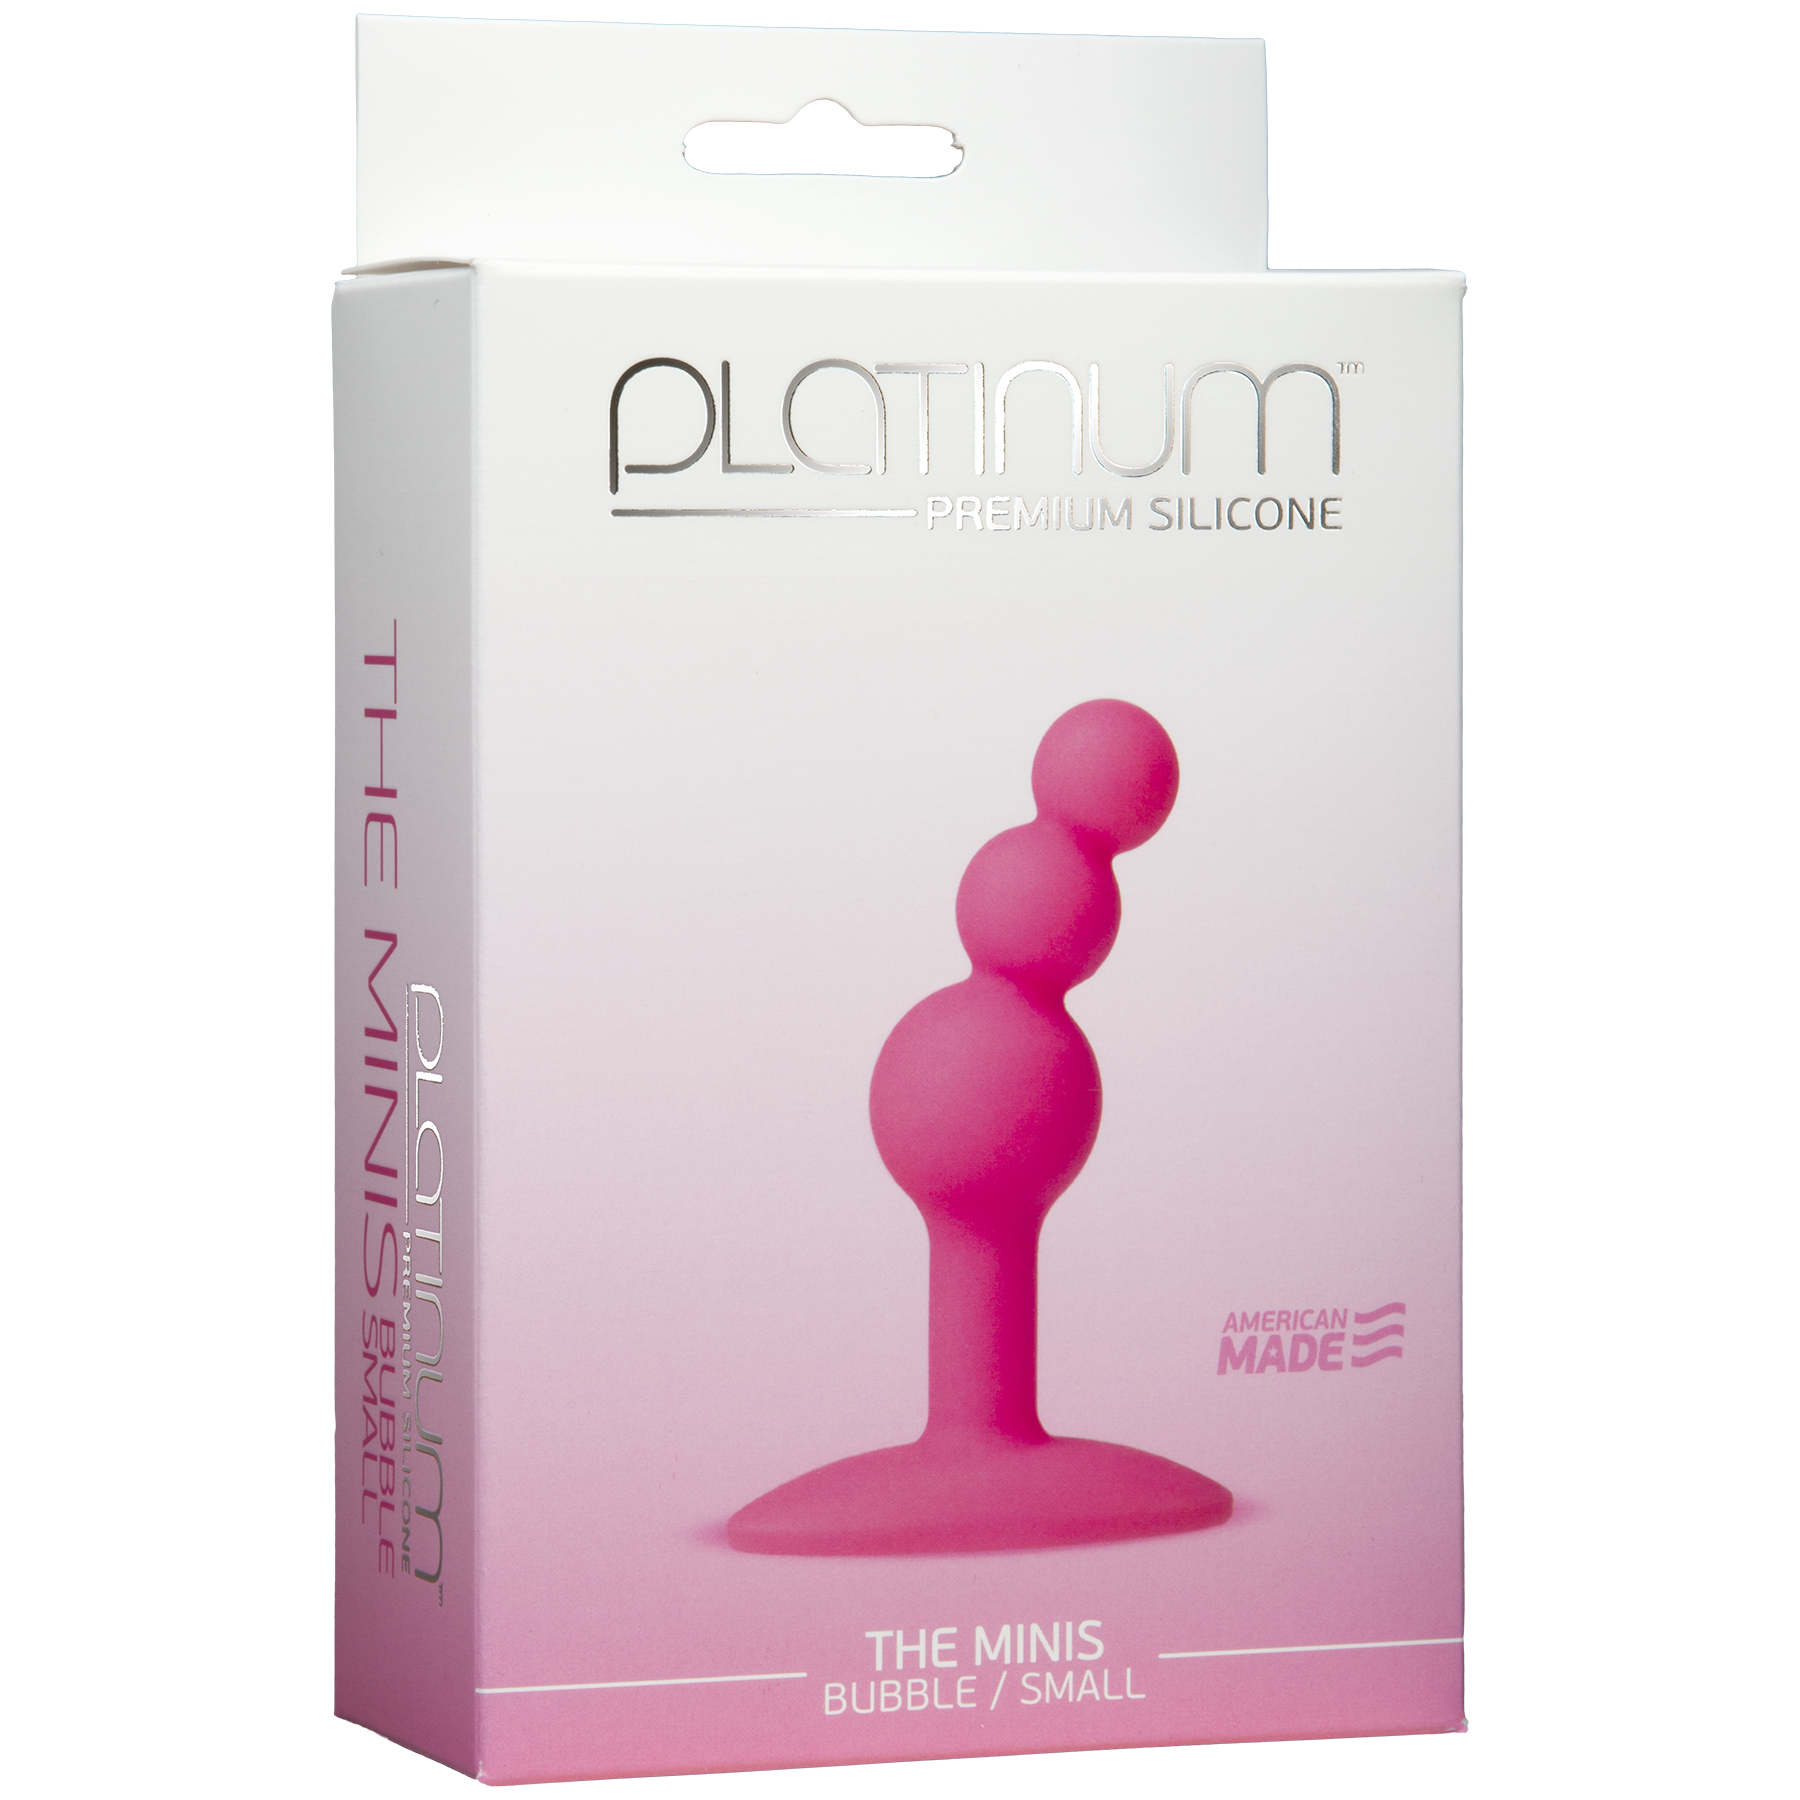 Platinum Premium Silicone The Mini's Bubble - Small, Pink - Thorn & Feather Sex Toy Canada